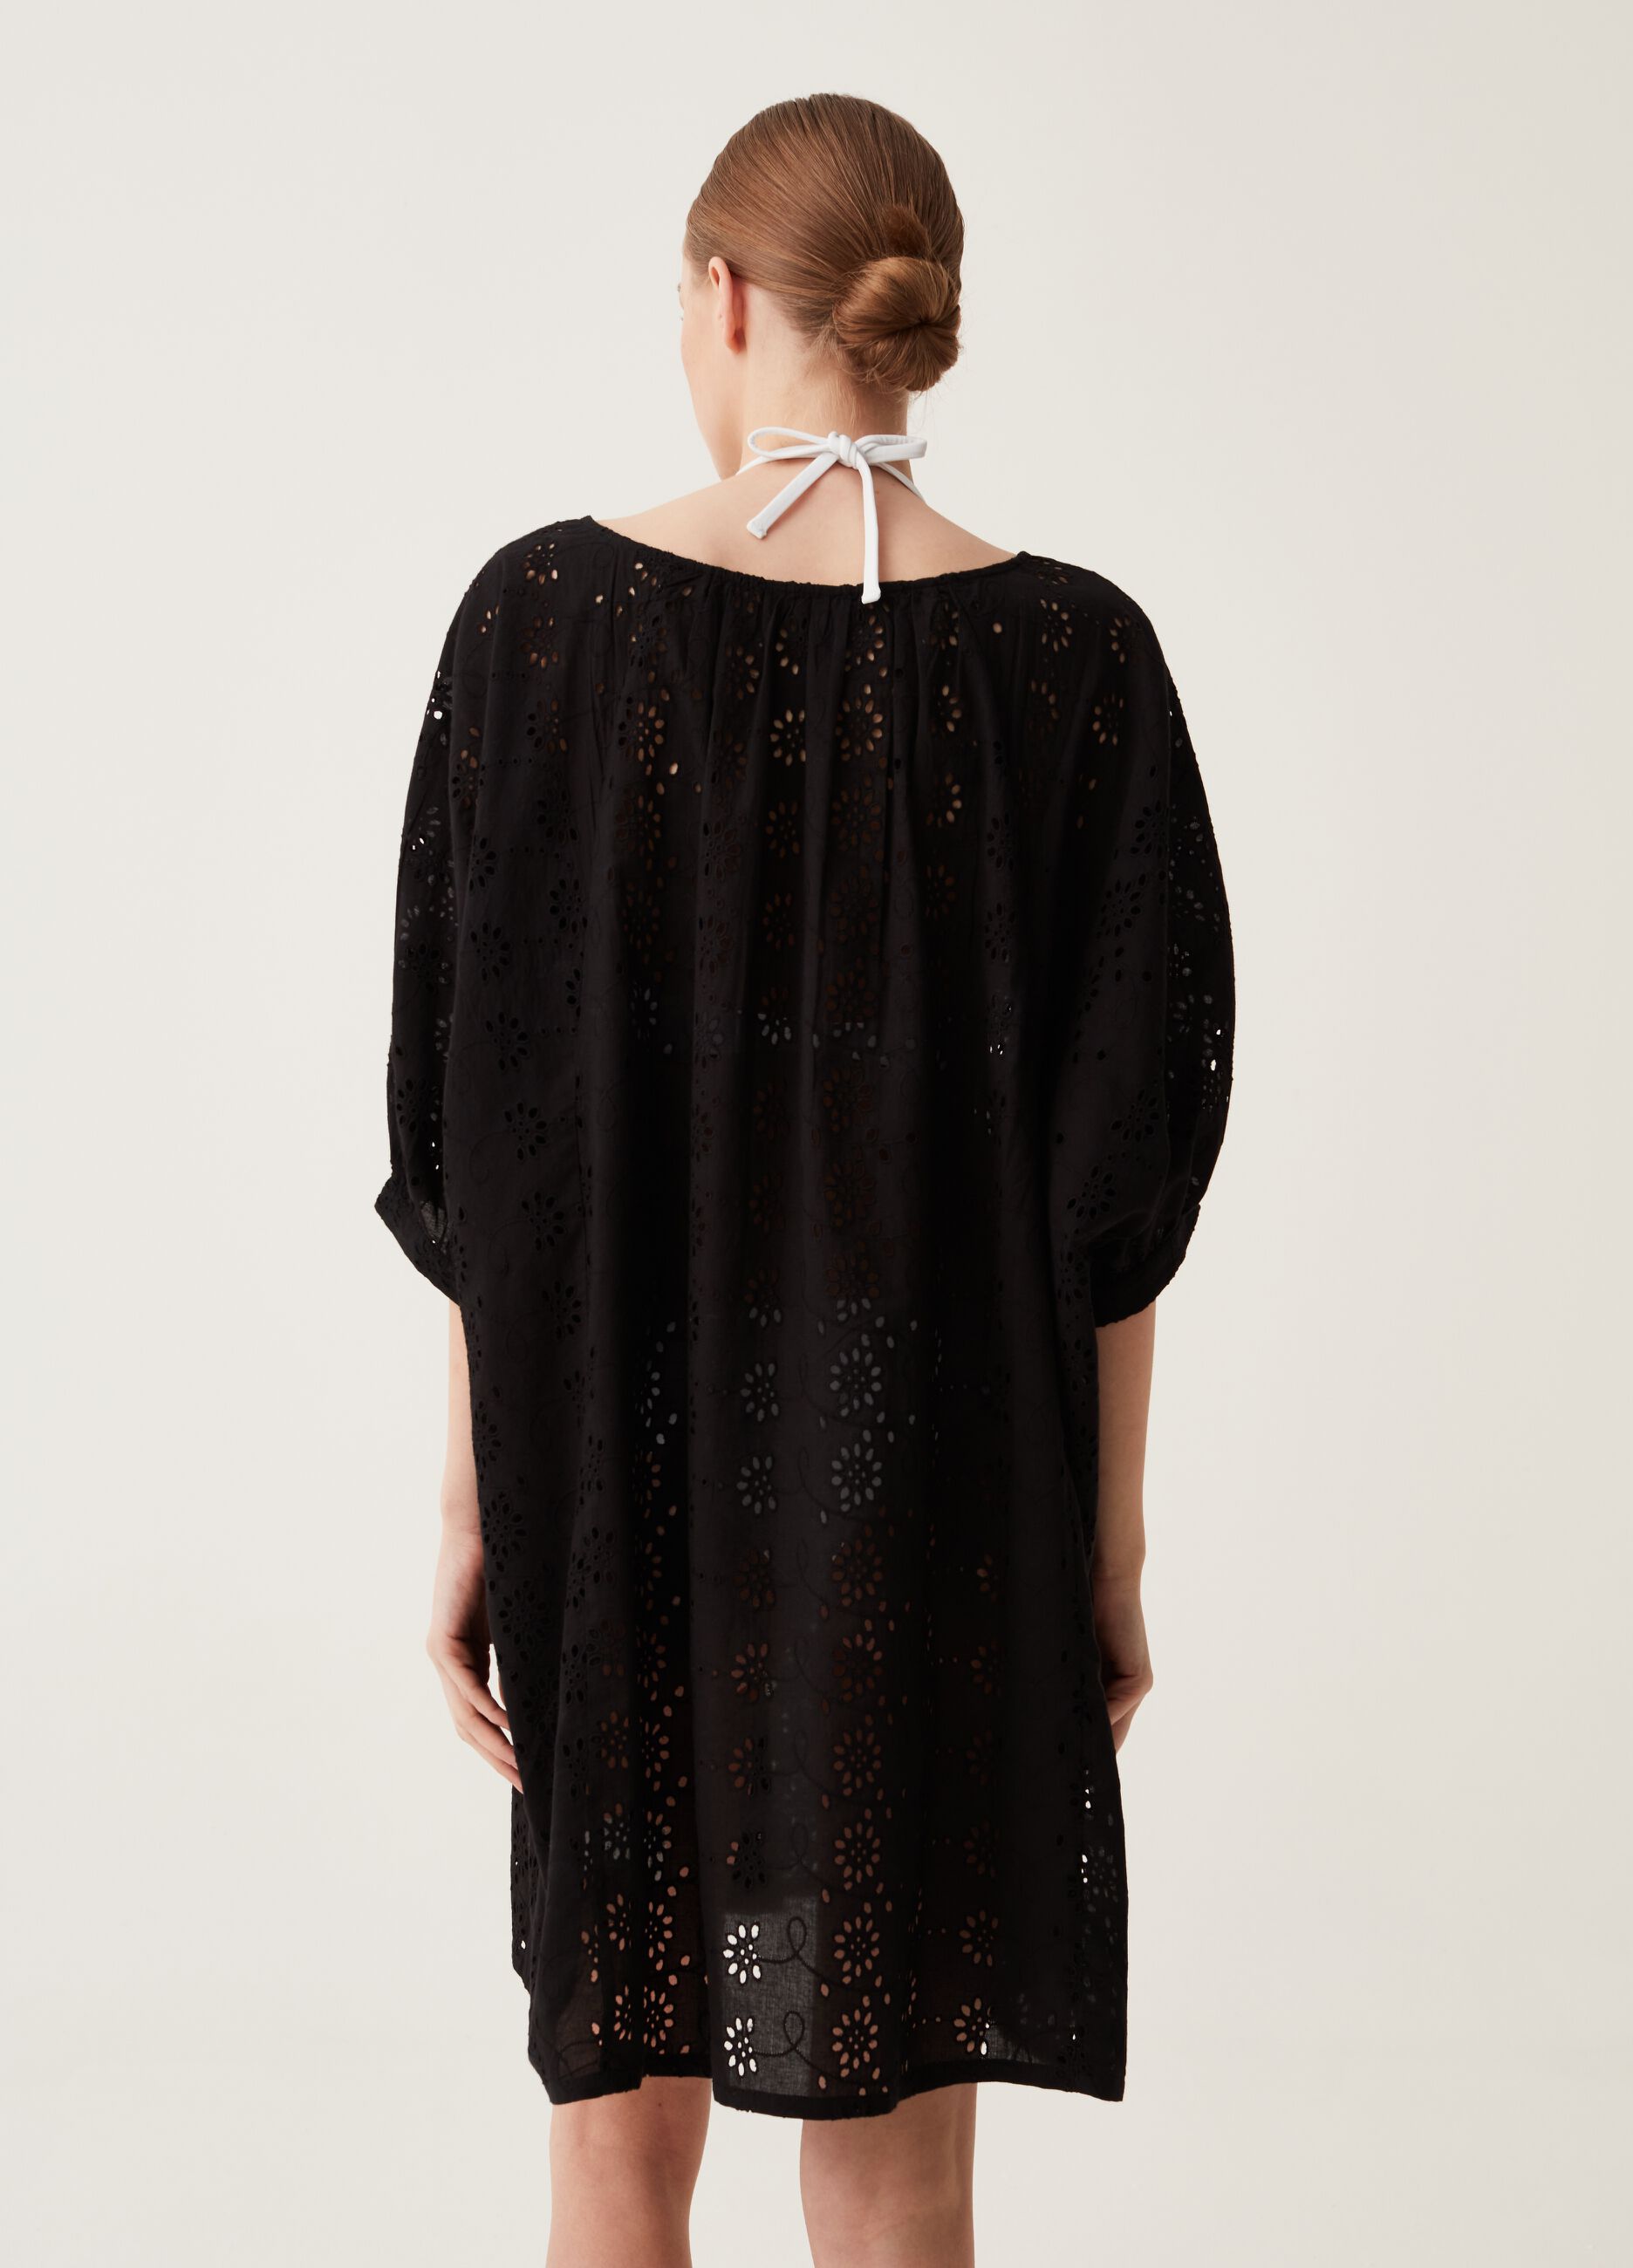 Beach cover-up in 100% cotton broderie anglaise.